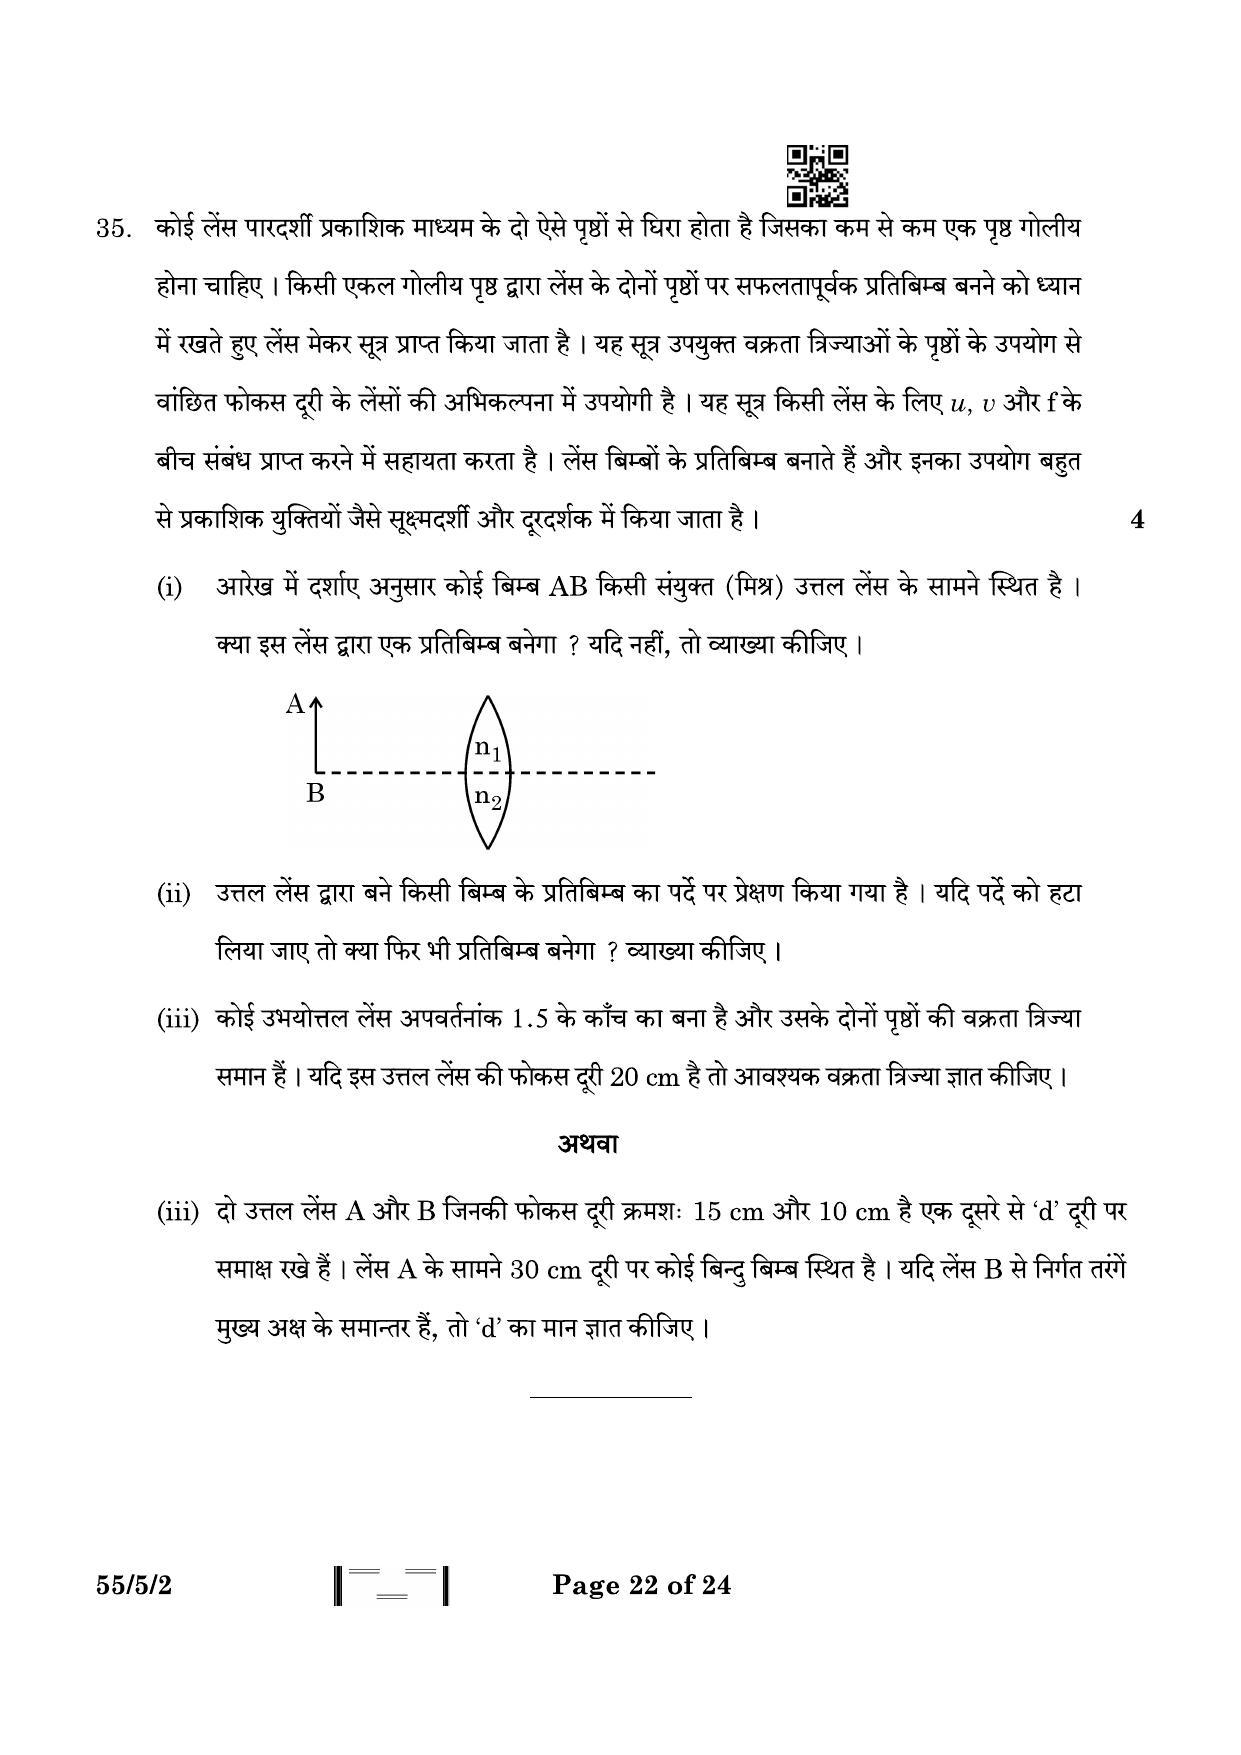 CBSE Class 12 55-5-2 Physics 2023 Question Paper - Page 22